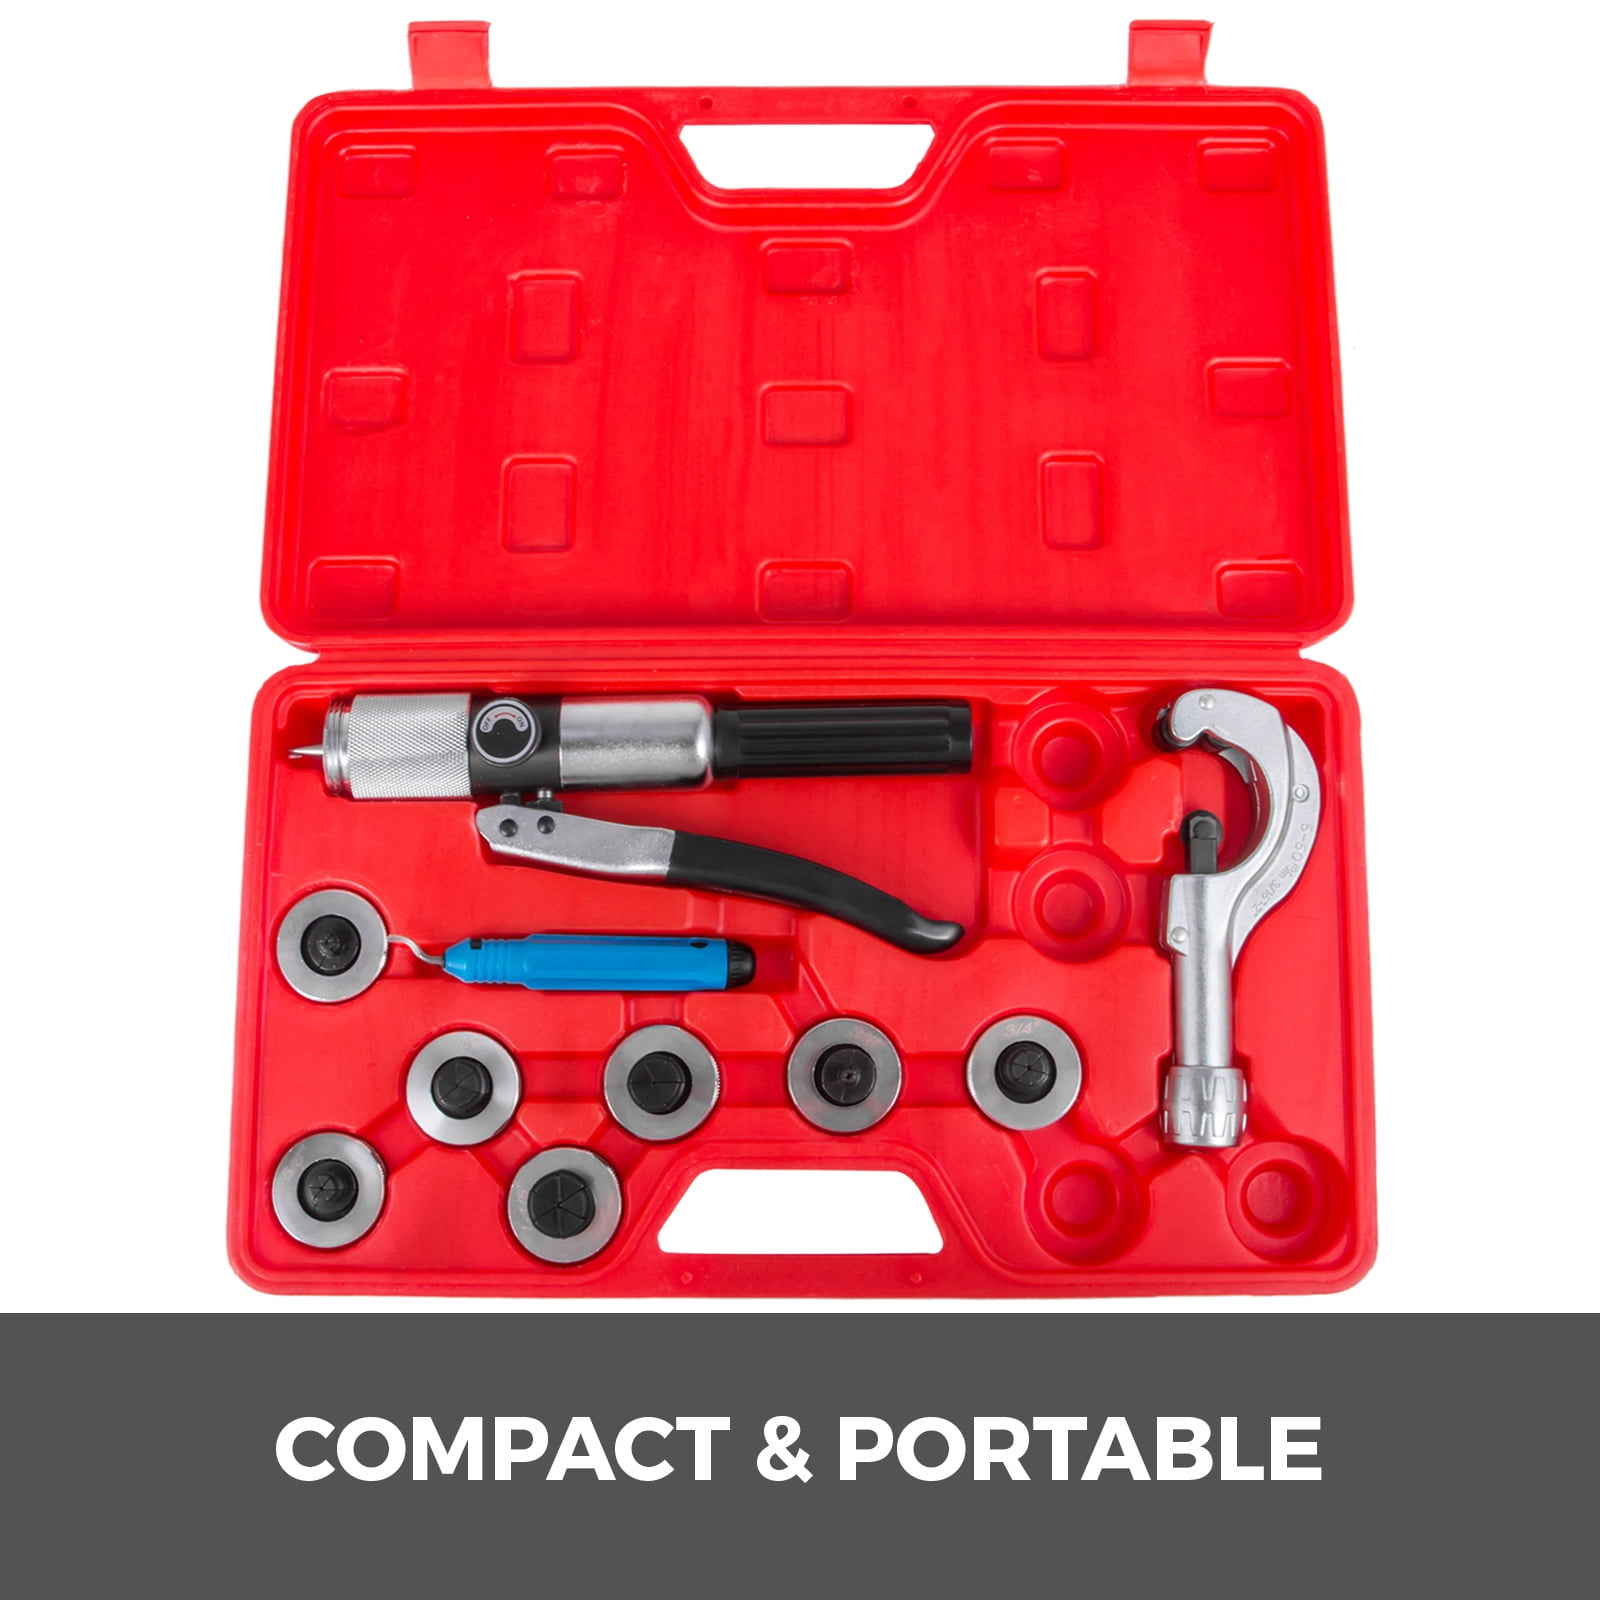 CT-300A Hydraulic Tube Expander 7 Levers Tubing Expanding Tool Swaging Kit Tools 